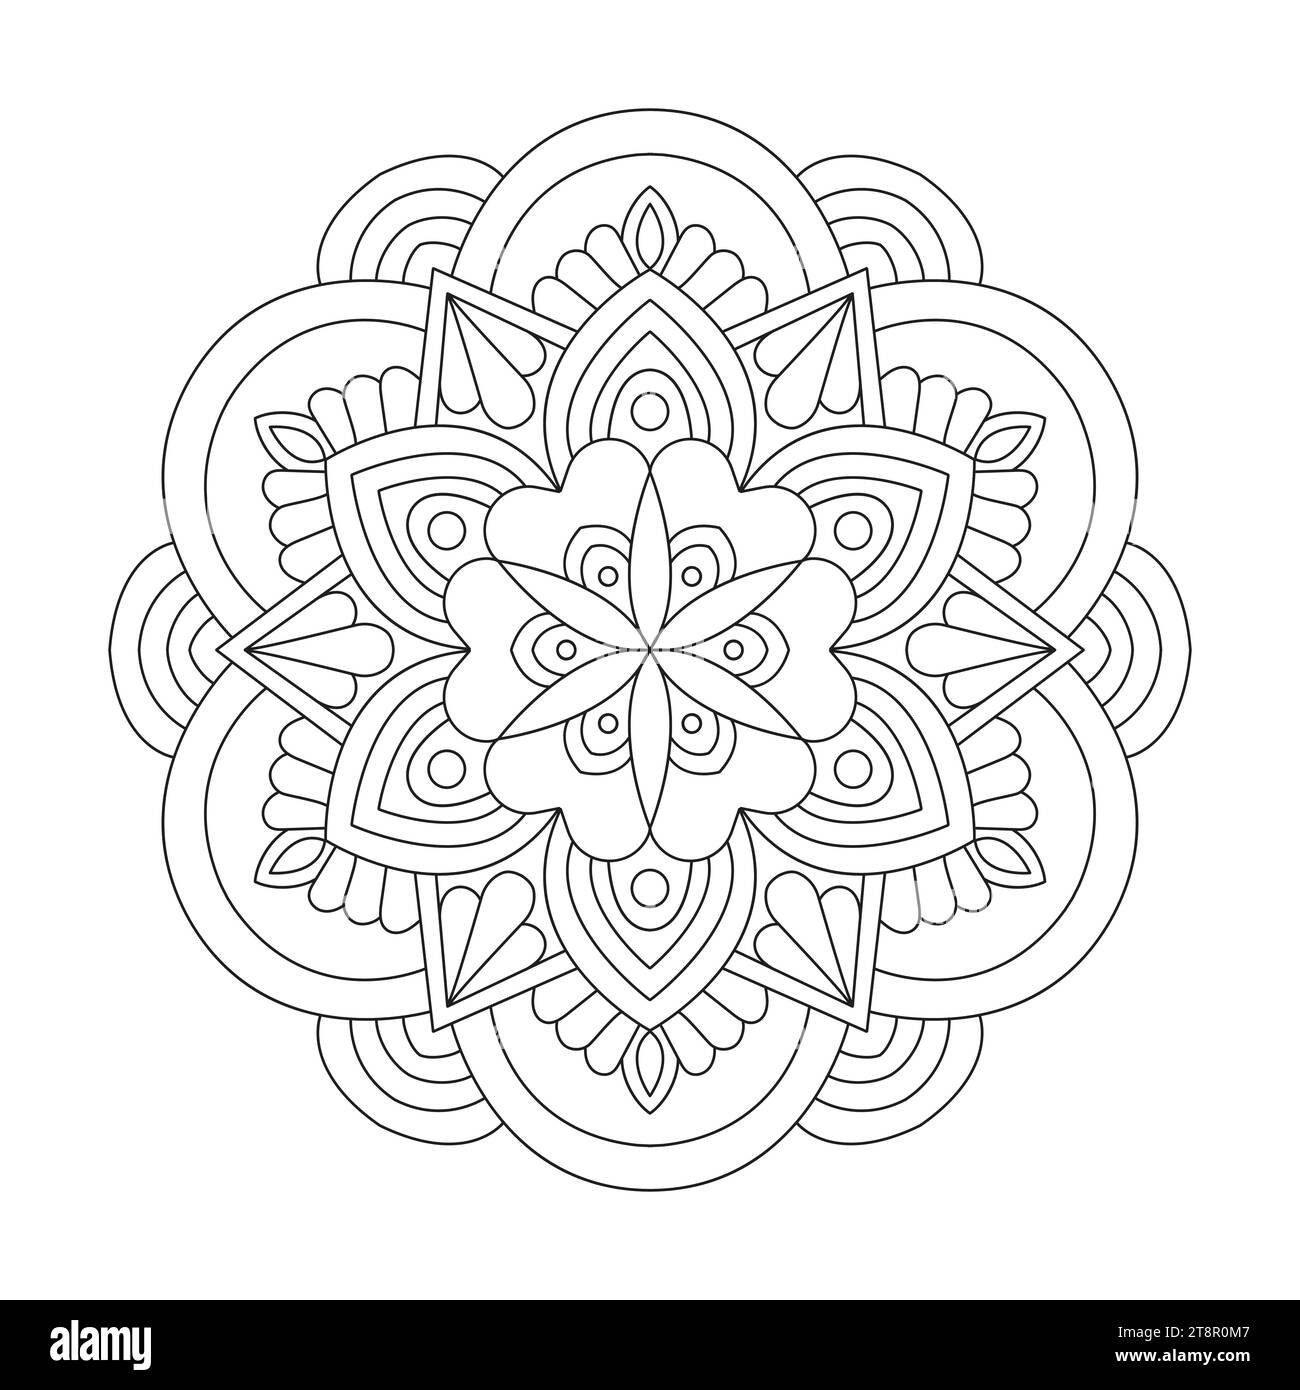 Graceful gestures mandalas colouring book page for KDP book interior. Peaceful Petals, Ability to Relax, Brain Experiences, Harmonious Haven, Peaceful Stock Vector